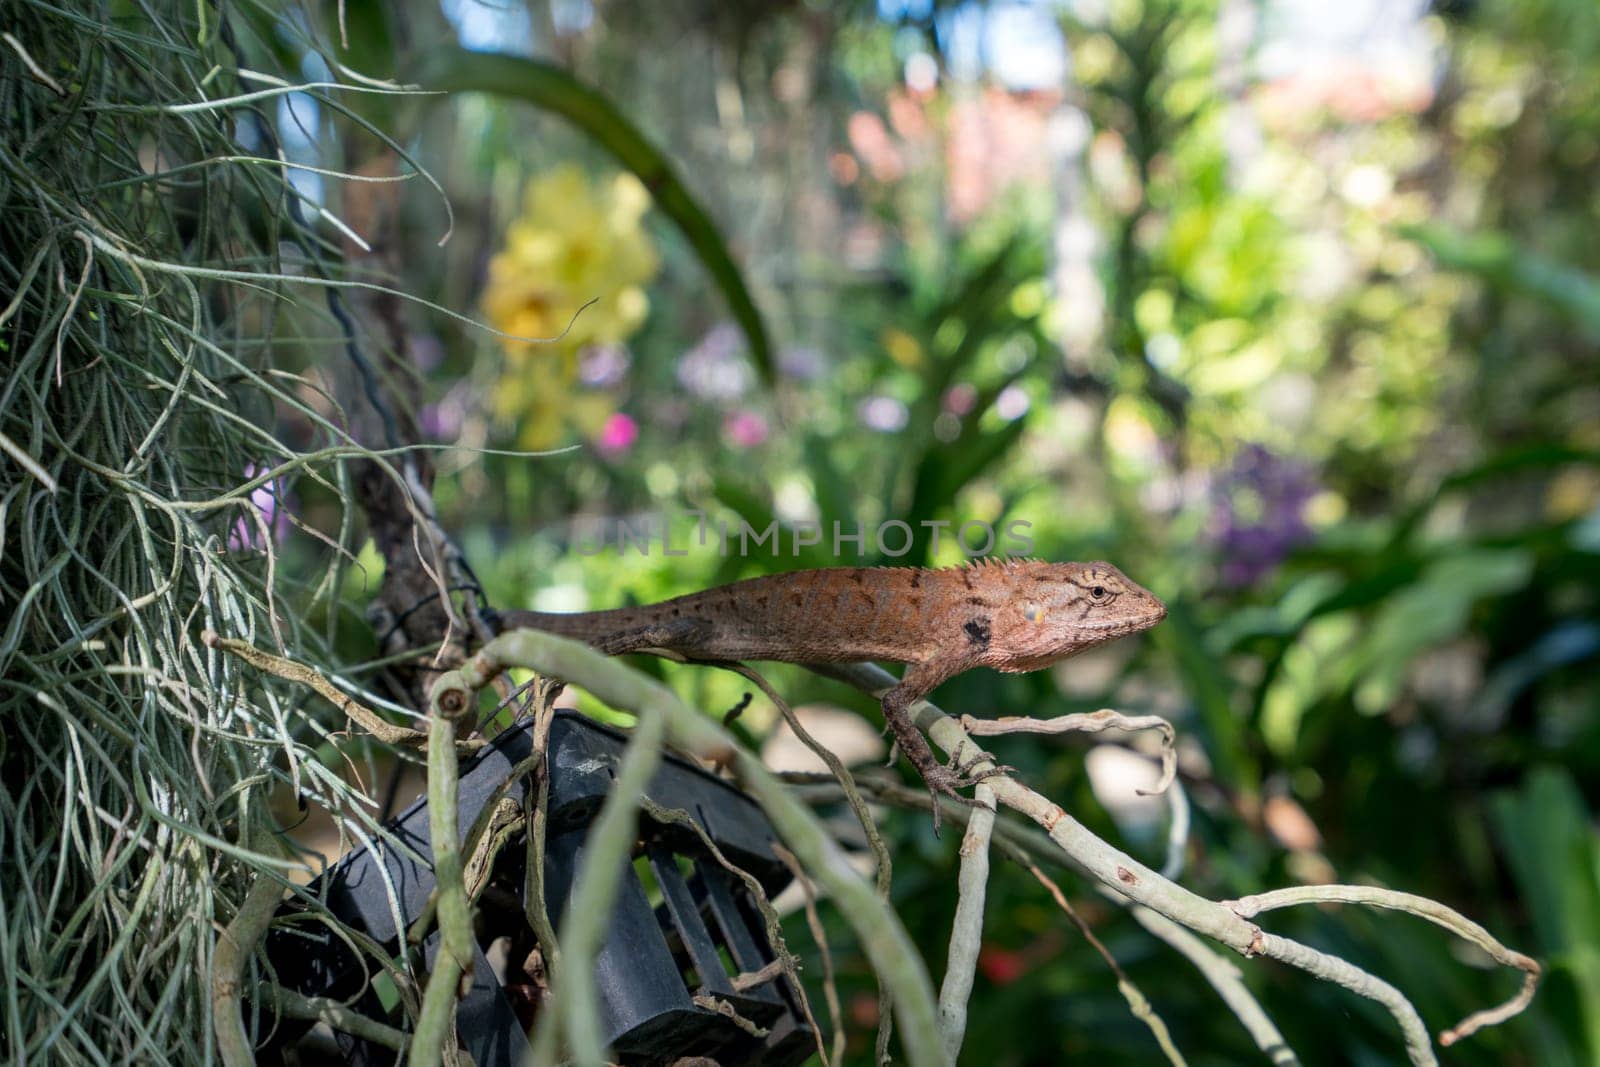 Image of lizard in tropical forest. Thailand by rivertime